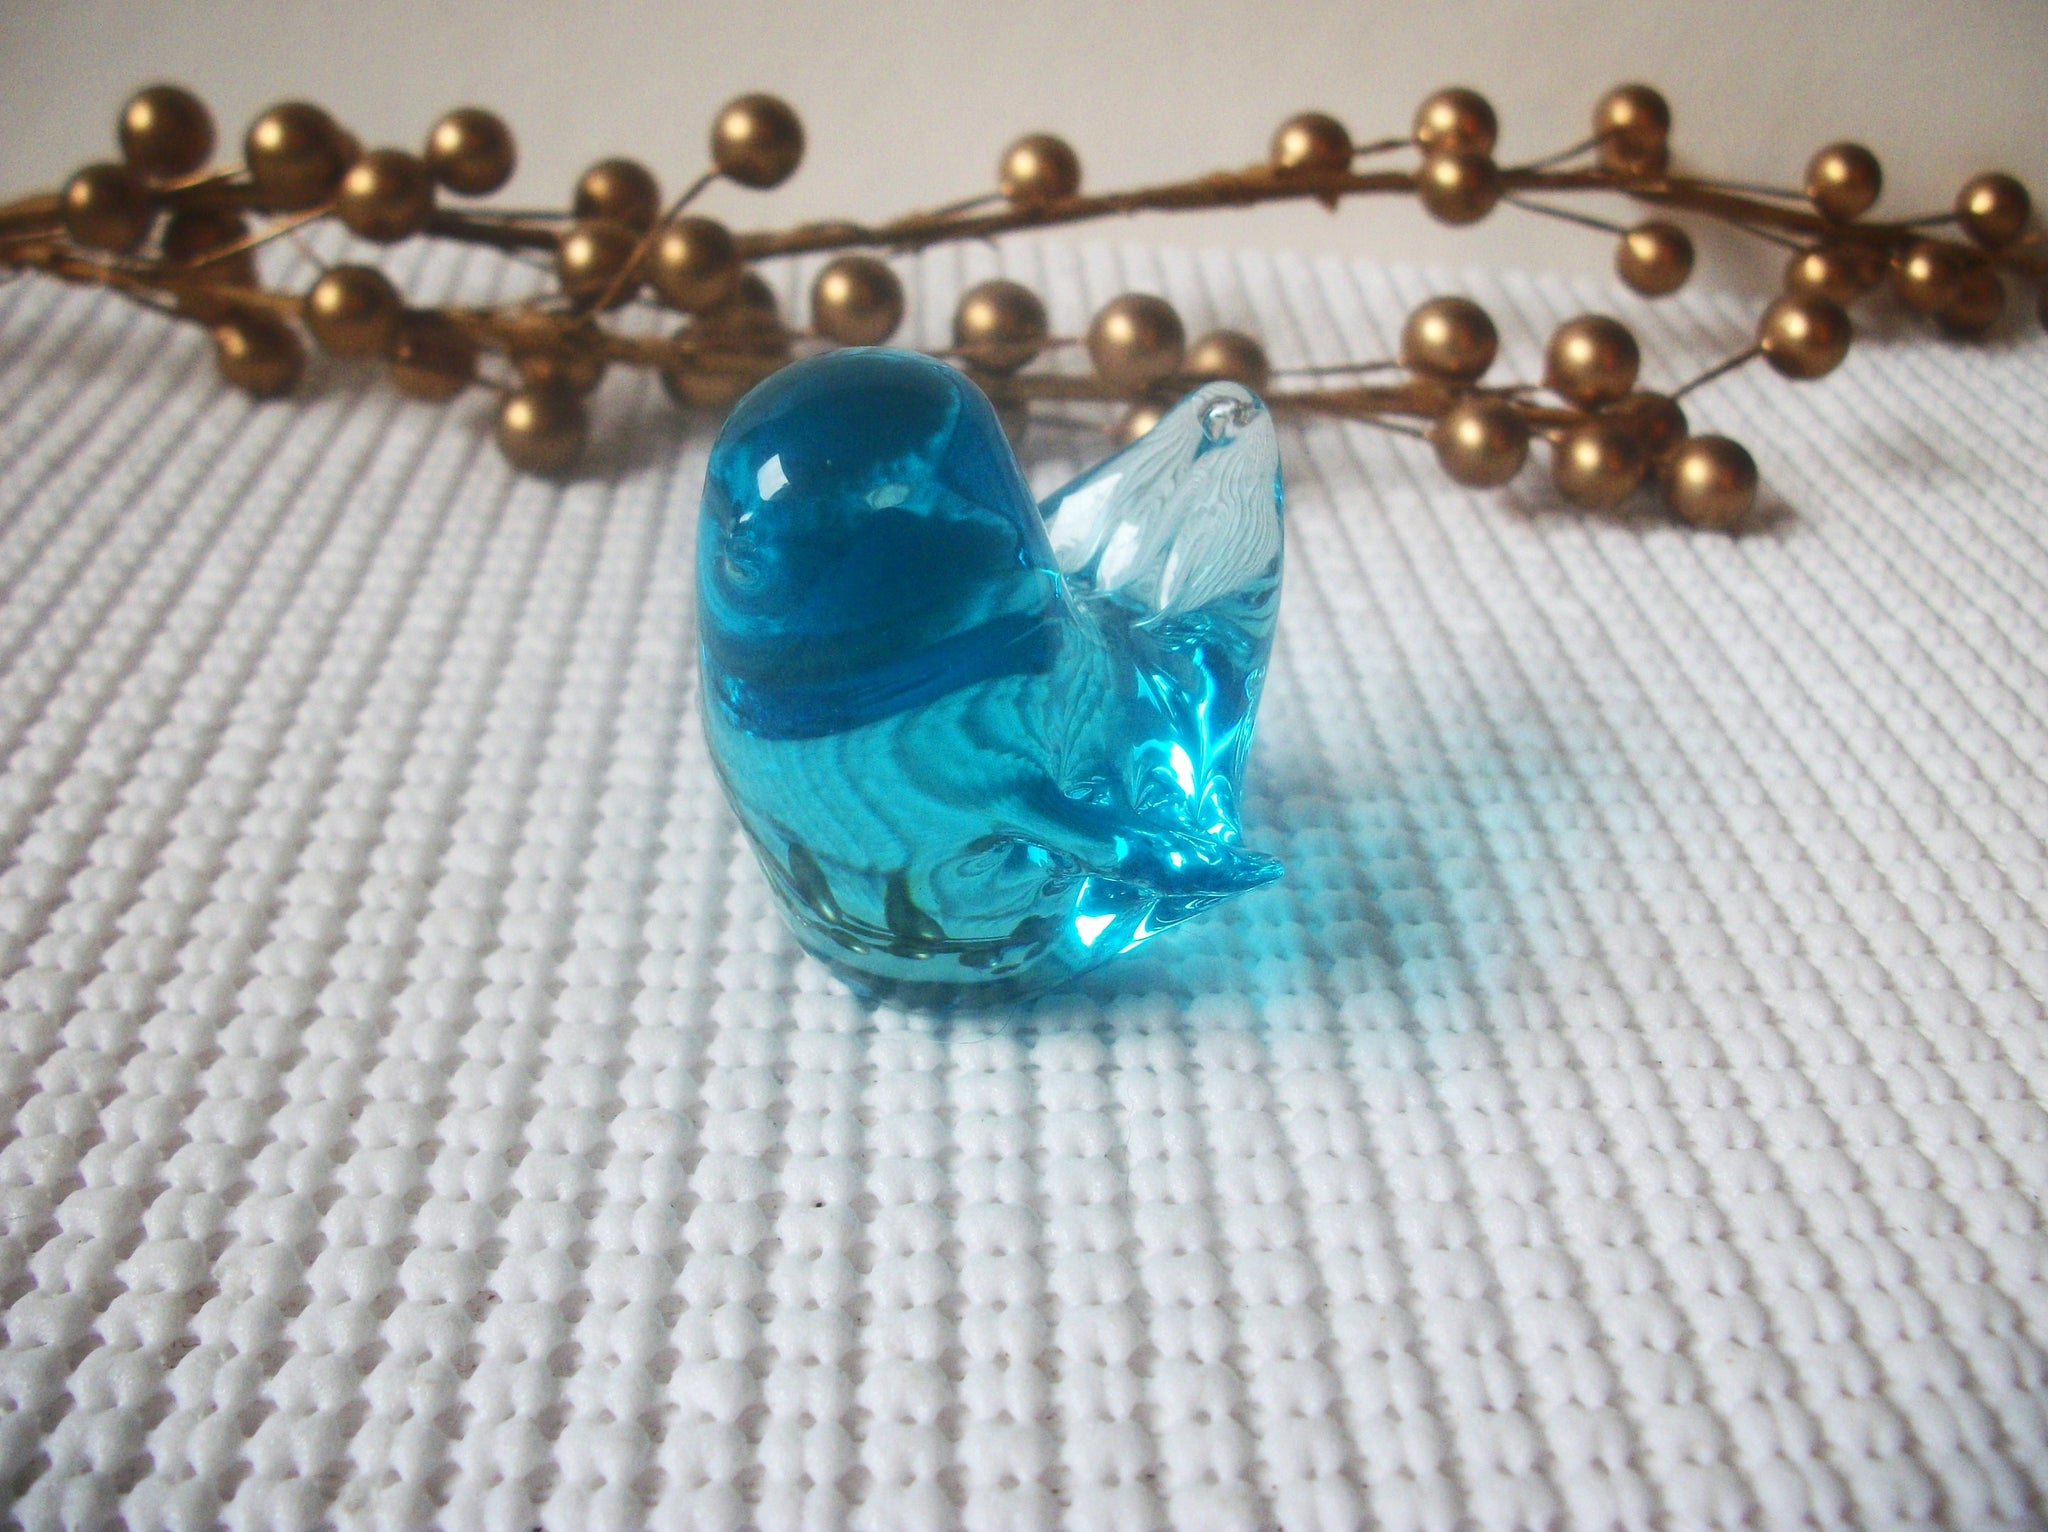 Vintage Small Blue Glass Unmarked Bird Figurine, Bookcase Decor, Bedside Table Decor, Collectible Blue Glass, Gift for Bird Lover C300